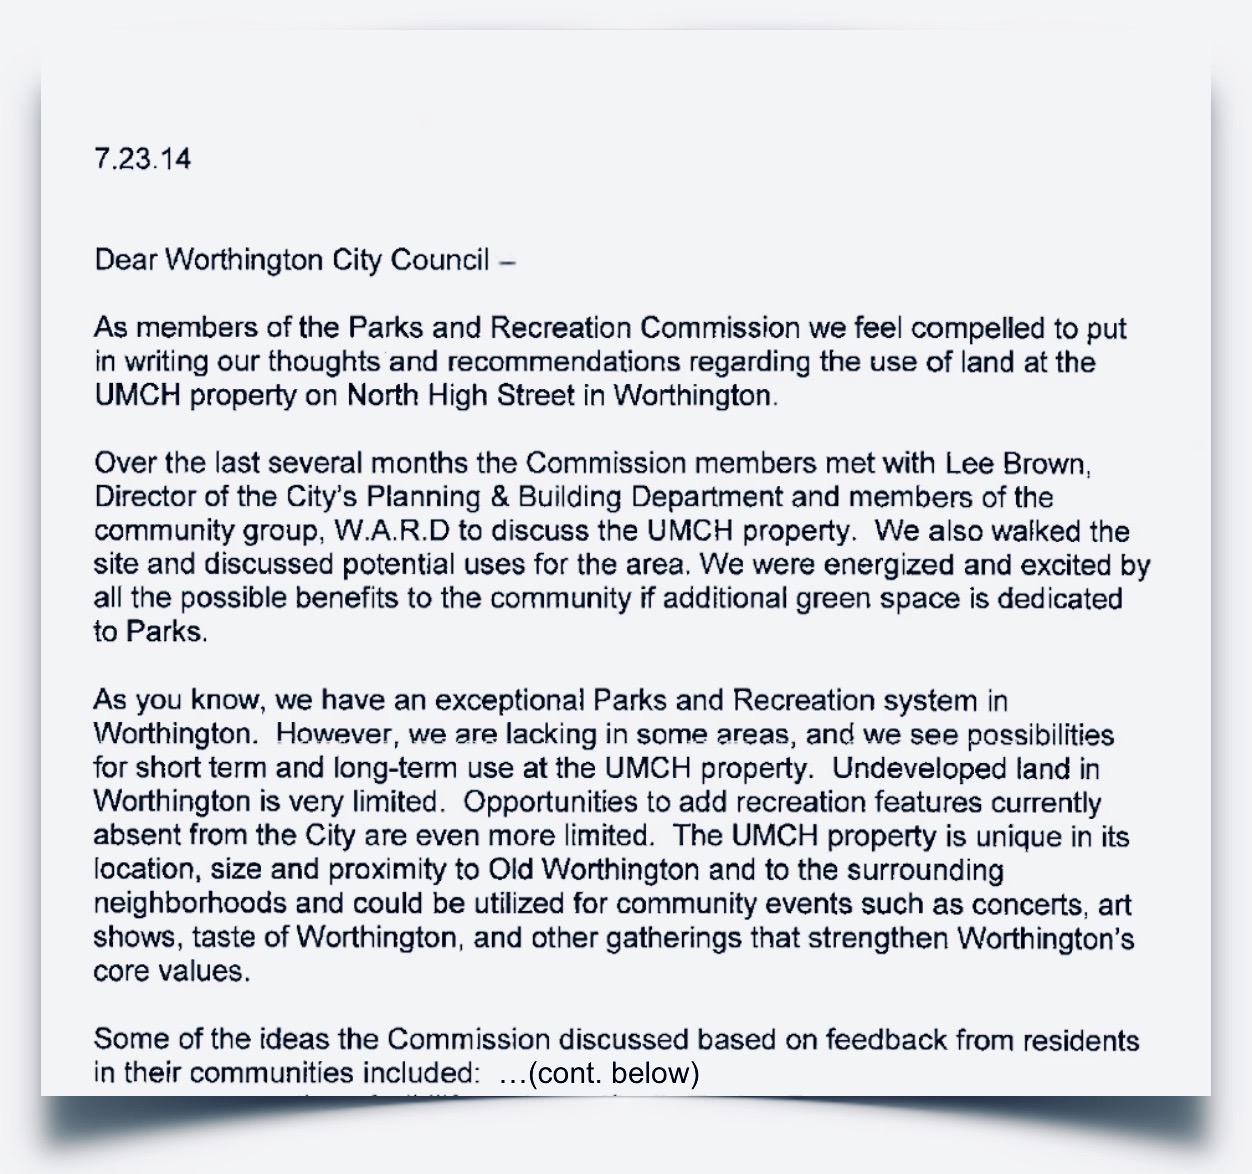 UMCH, Parks and Rec Commission letter to City Council (8): "We